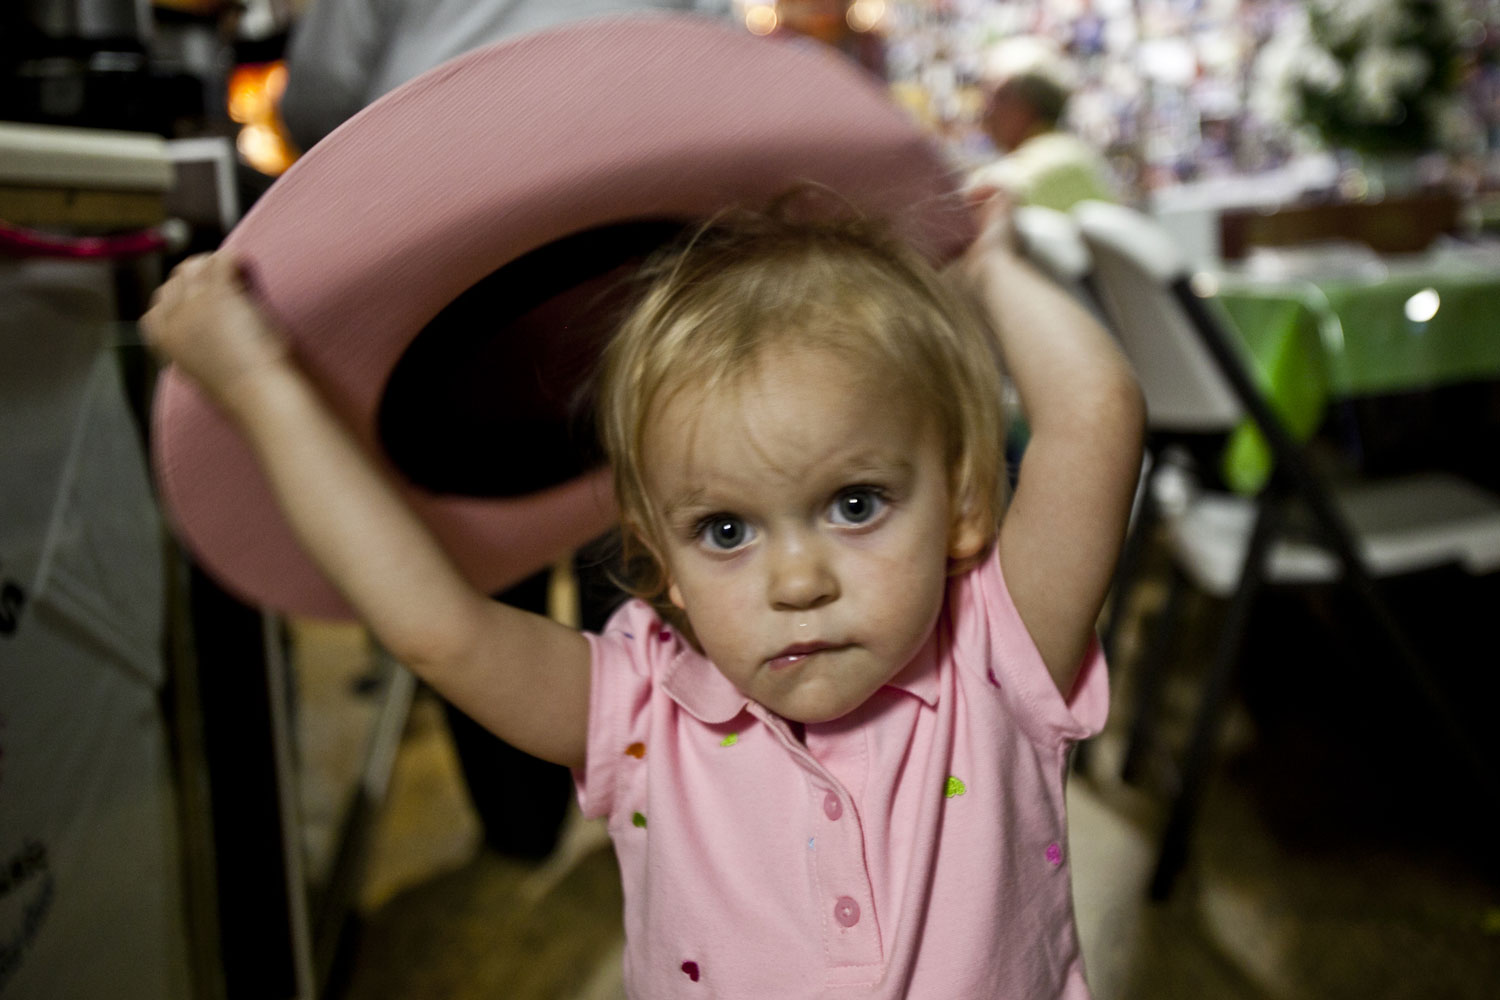 A young girl with a pink hat bites her lip